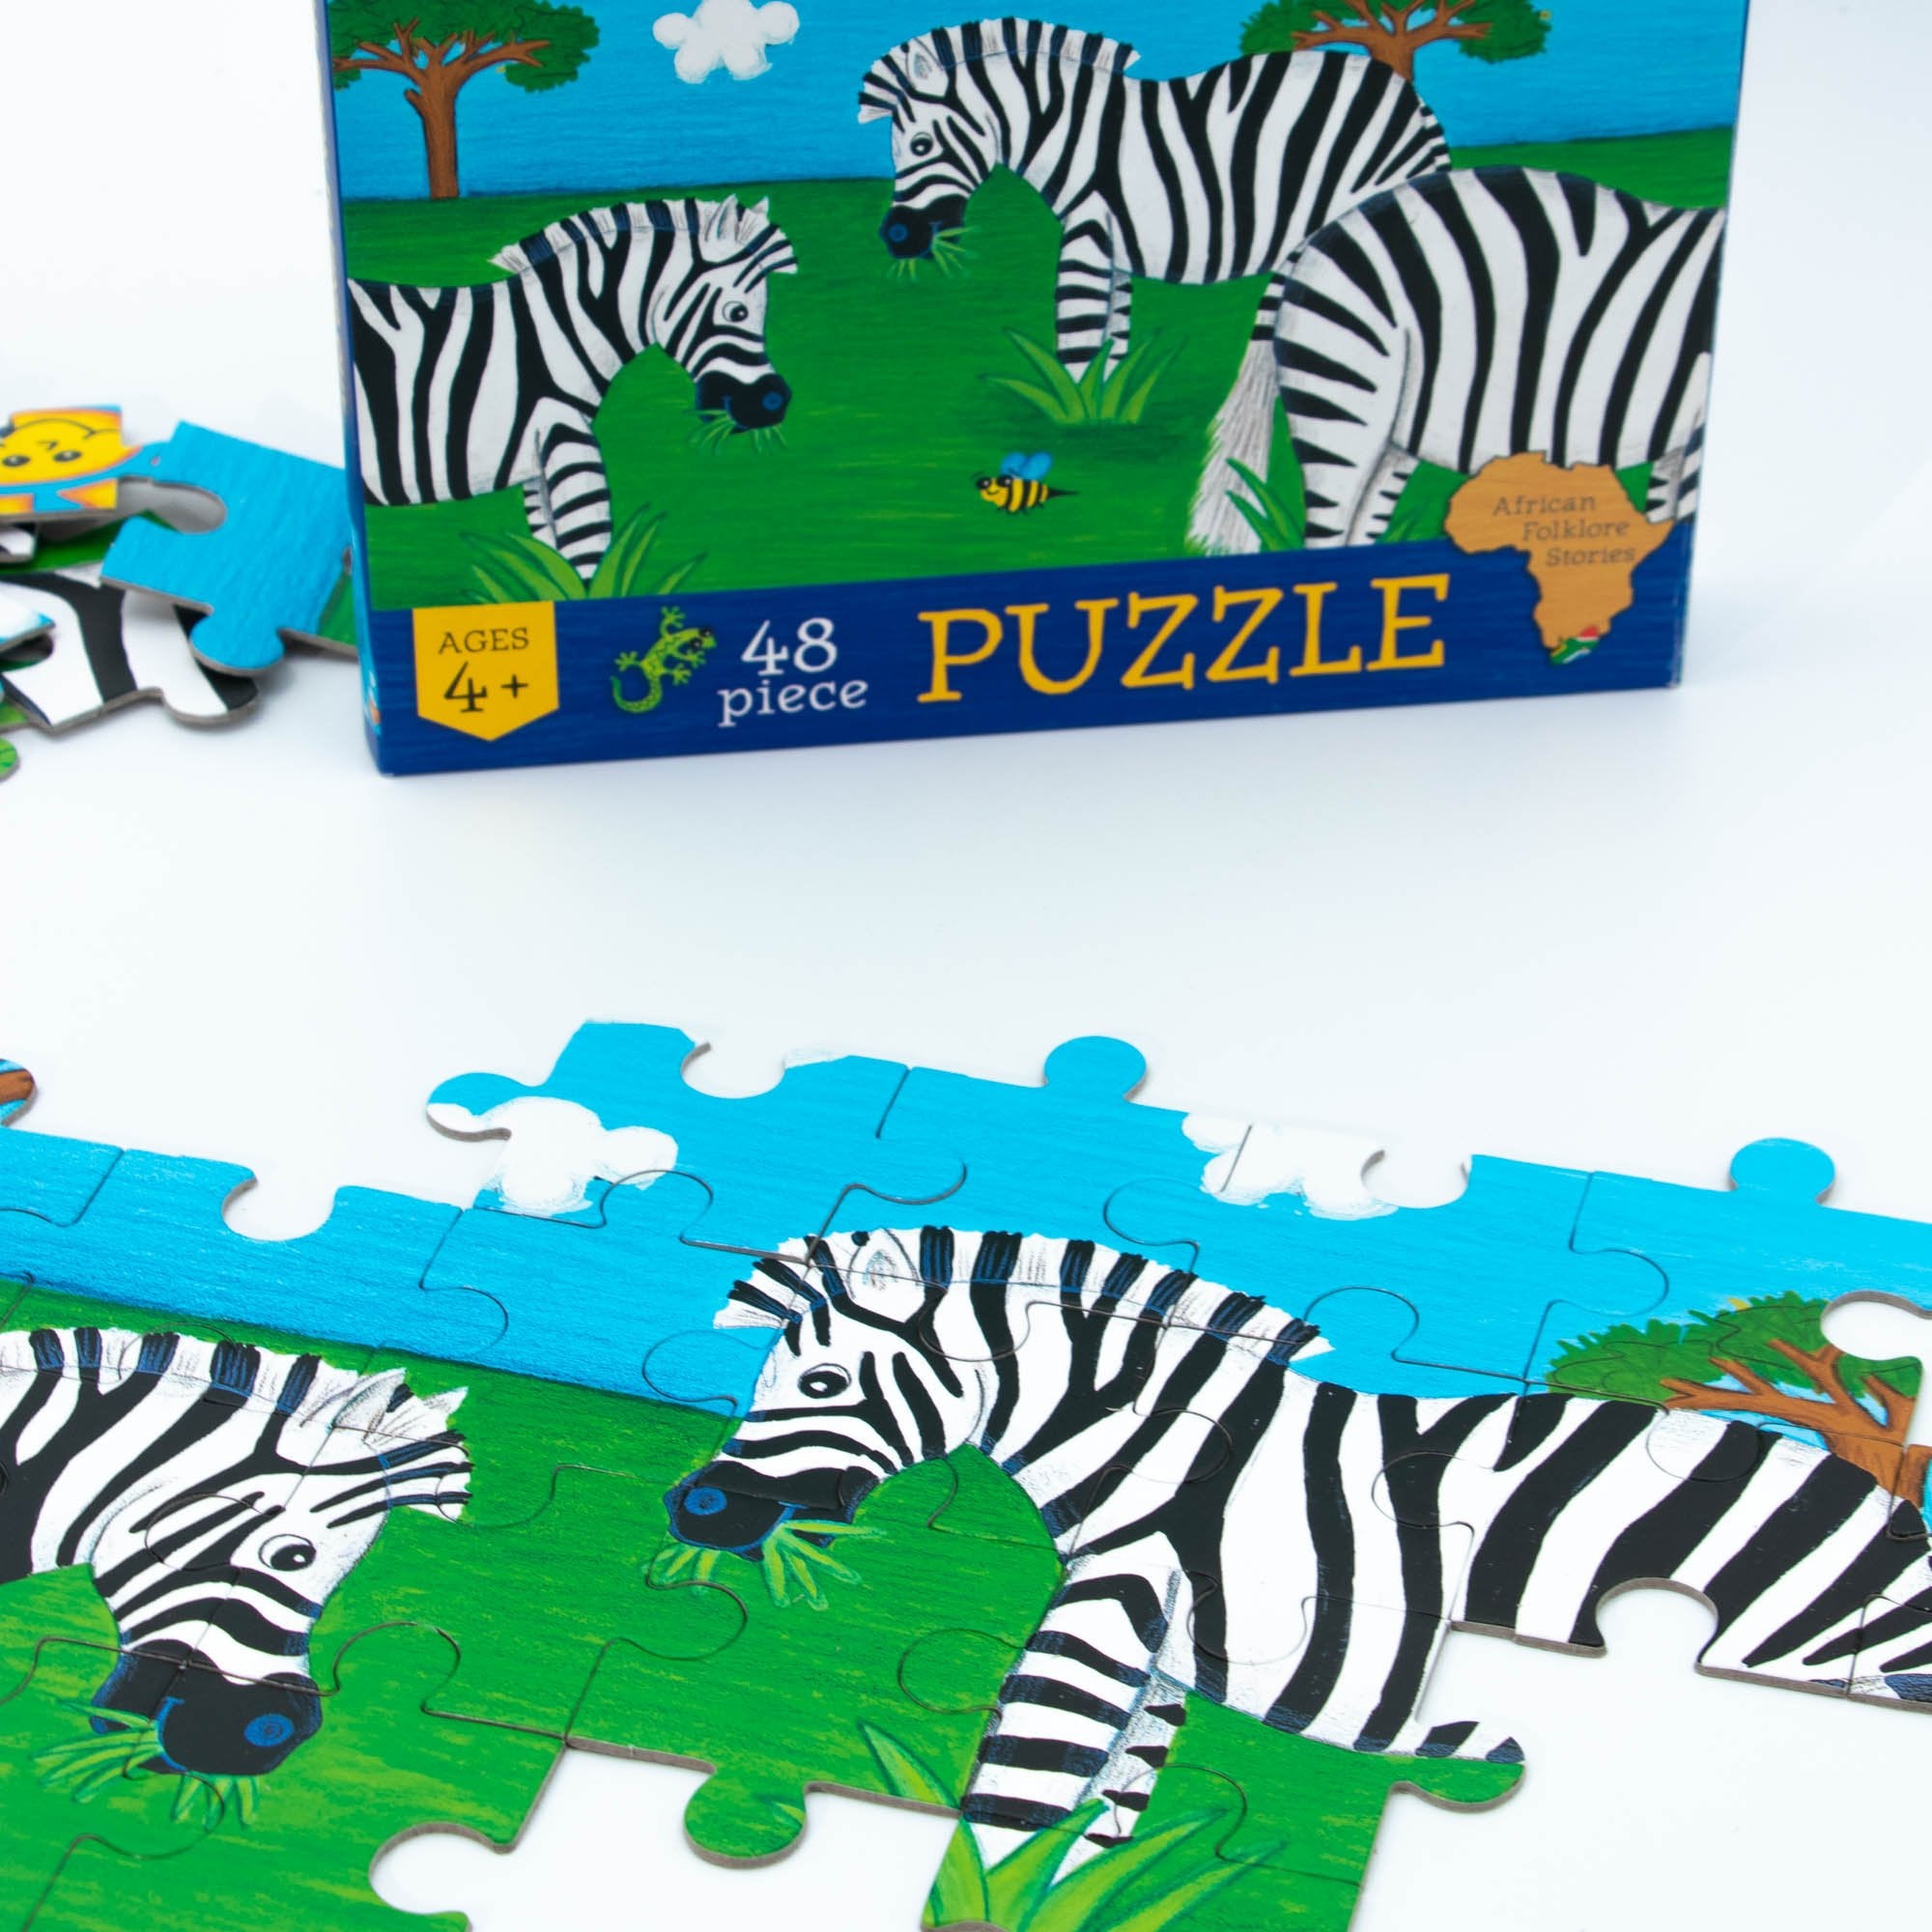 African Folklore Stories - Zebra Puzzle